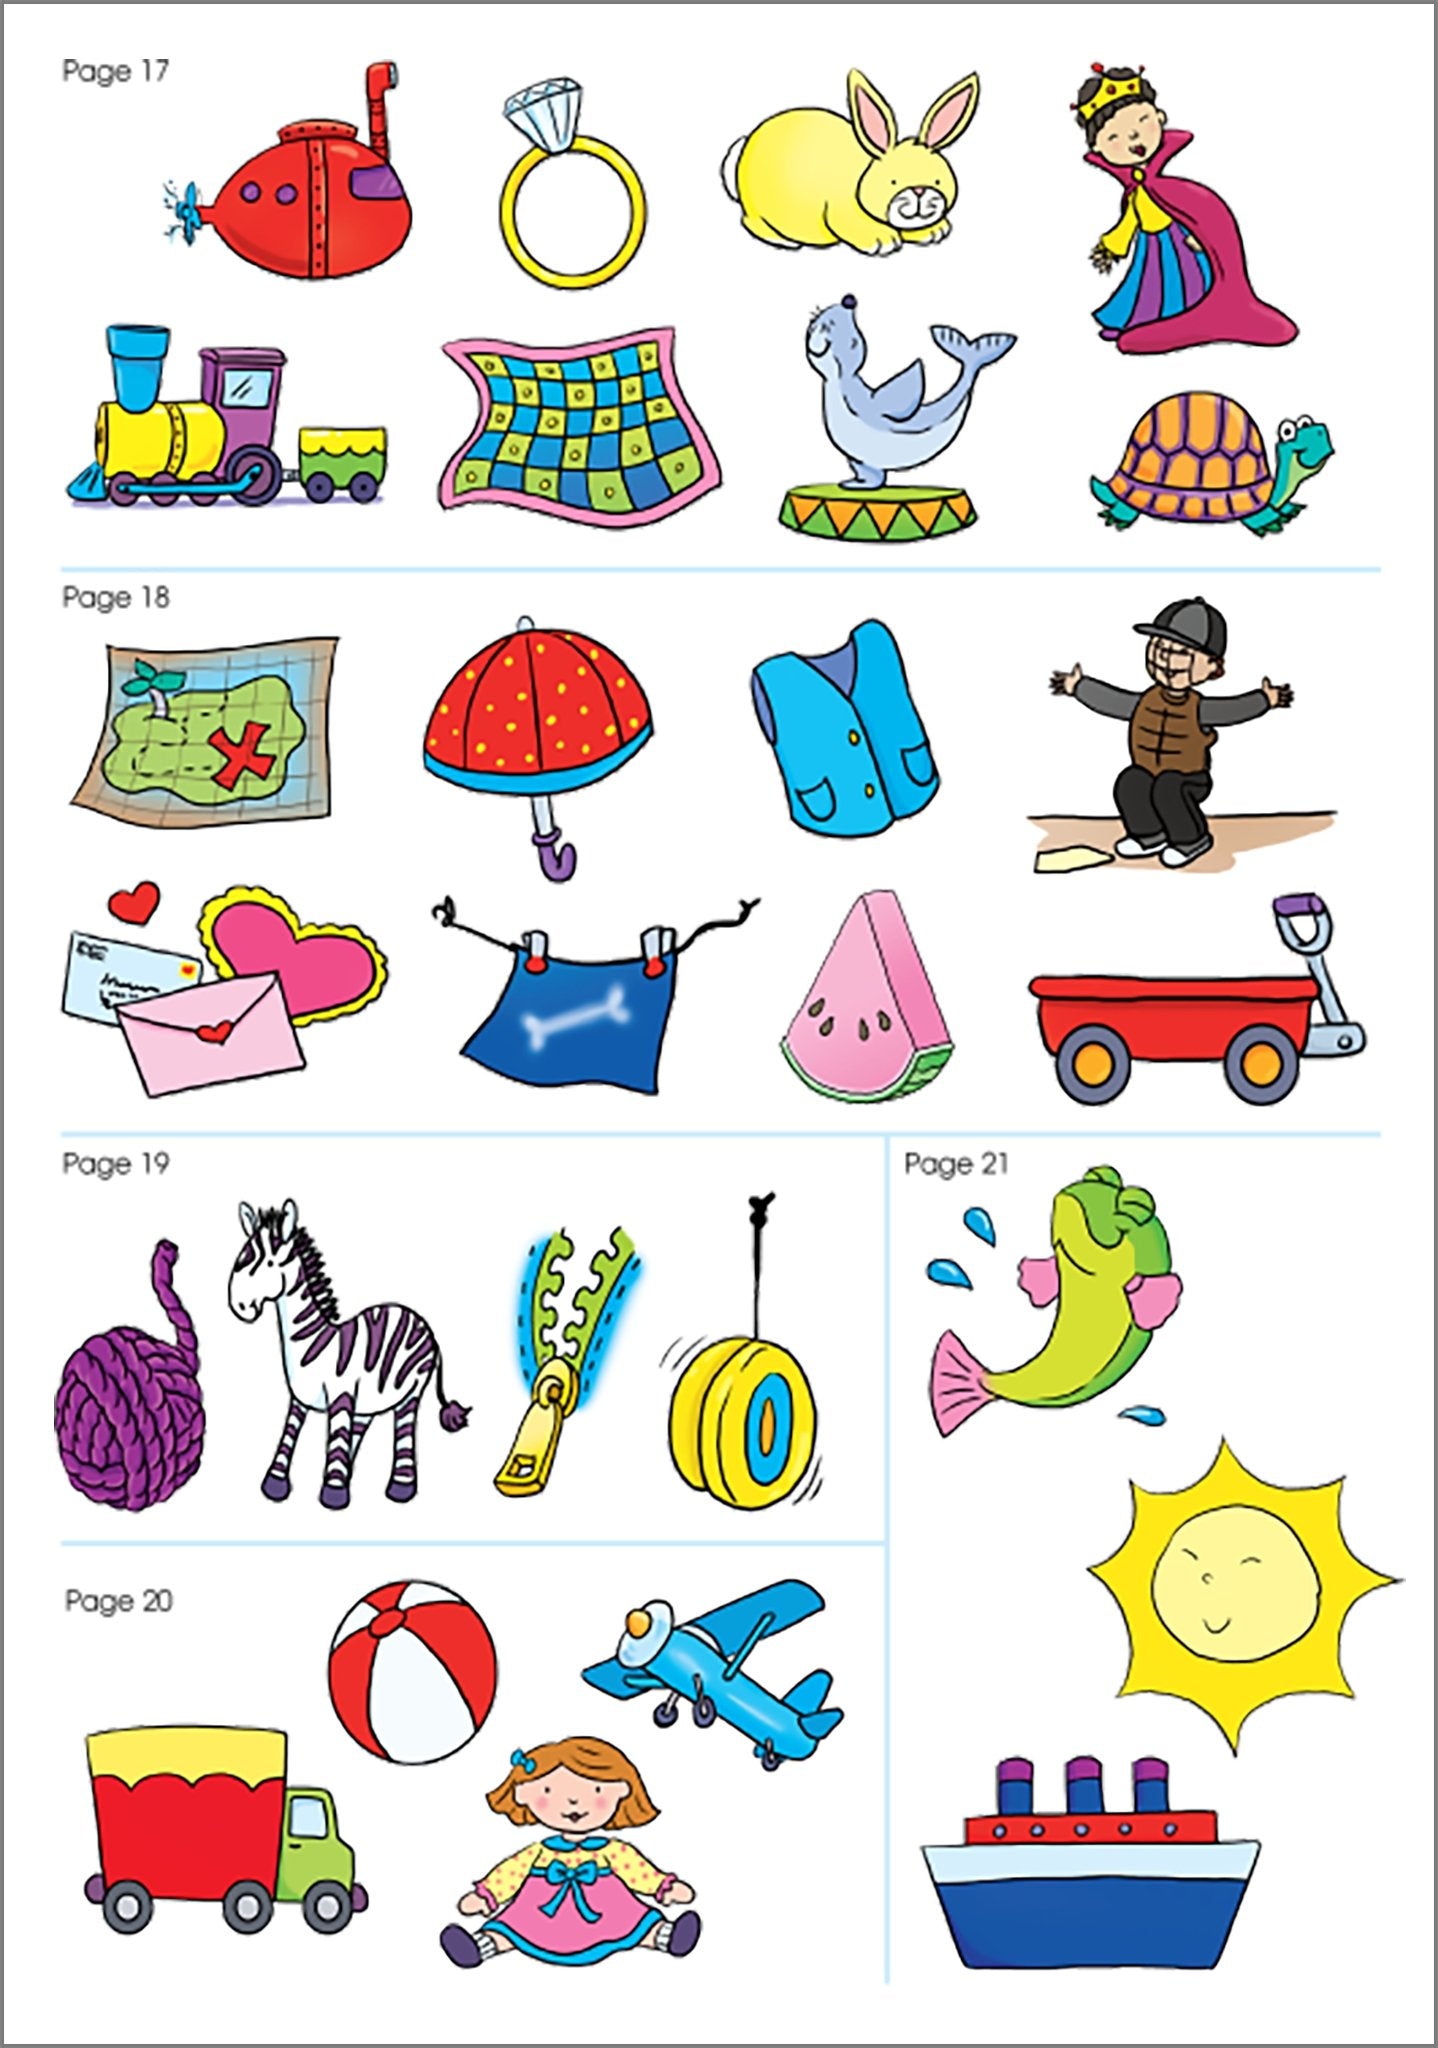 Preschool Stickers Workbook - Ages 3 to 6, Preschool to Kindergarten, Shapes, Patterns, ABC's, Numbers, and Letters